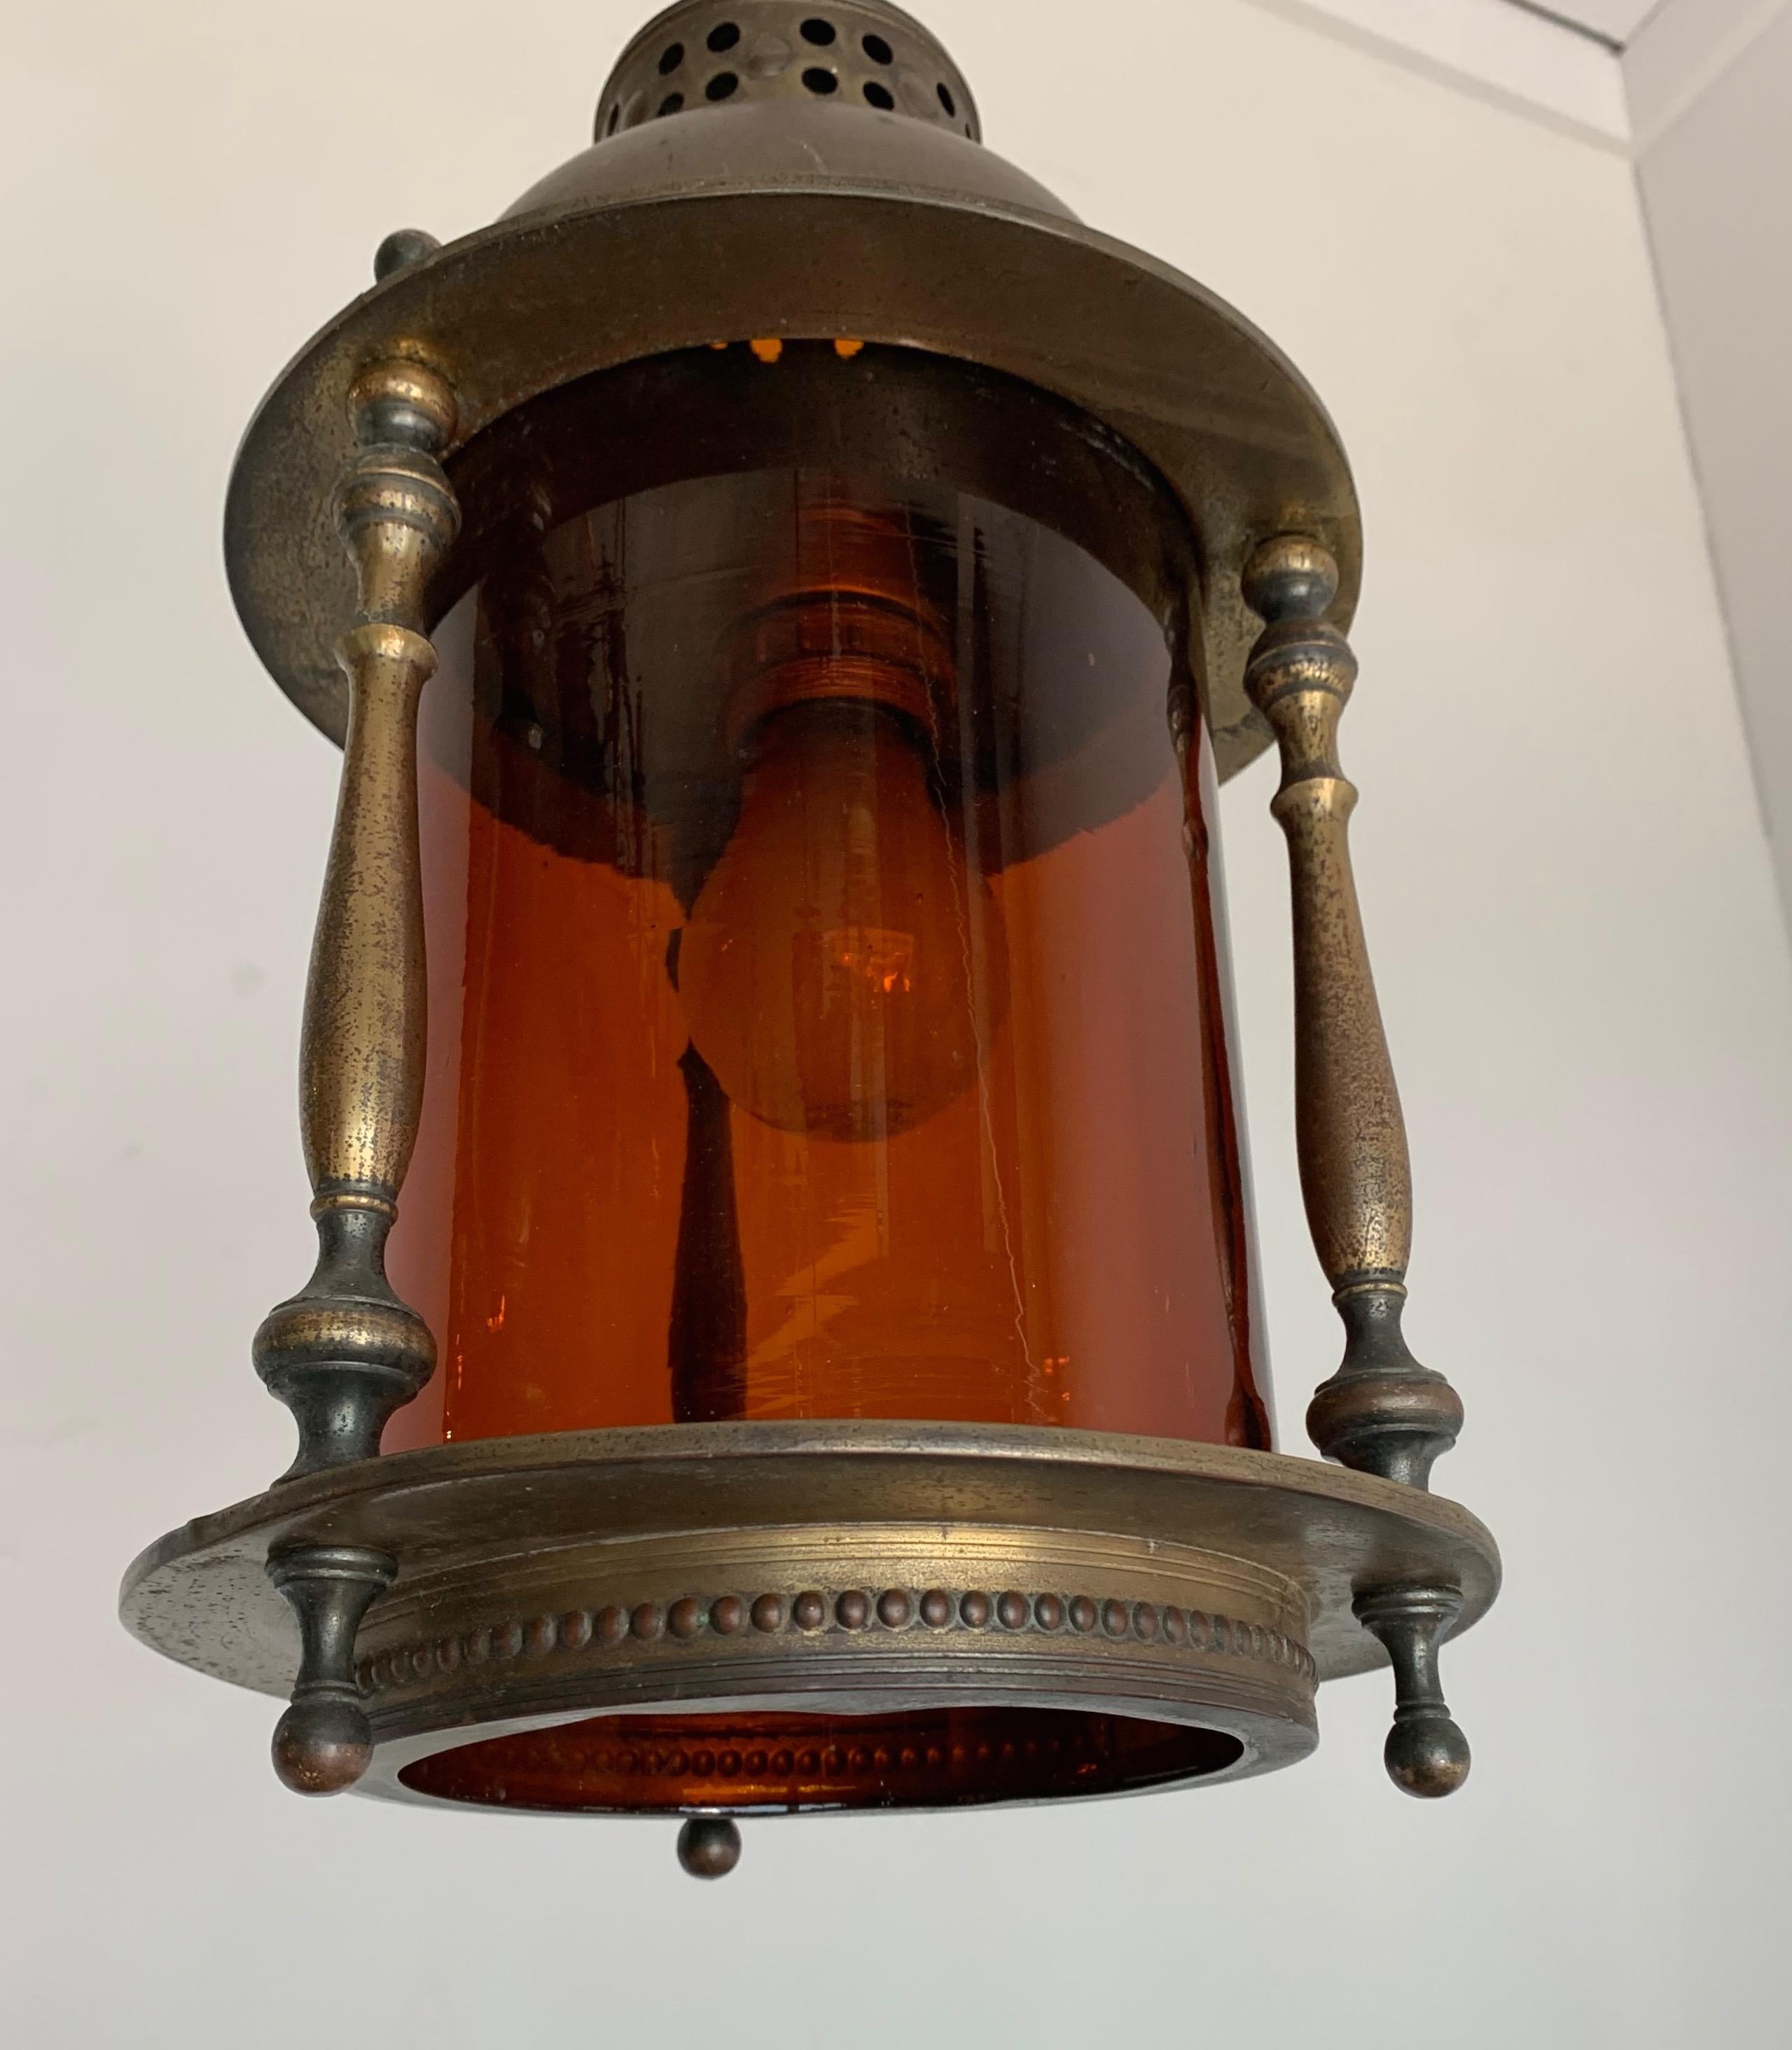 Rare Early 20th Century Brass & Orange Glass Ships Model Lantern Pendant Light In Good Condition For Sale In Lisse, NL